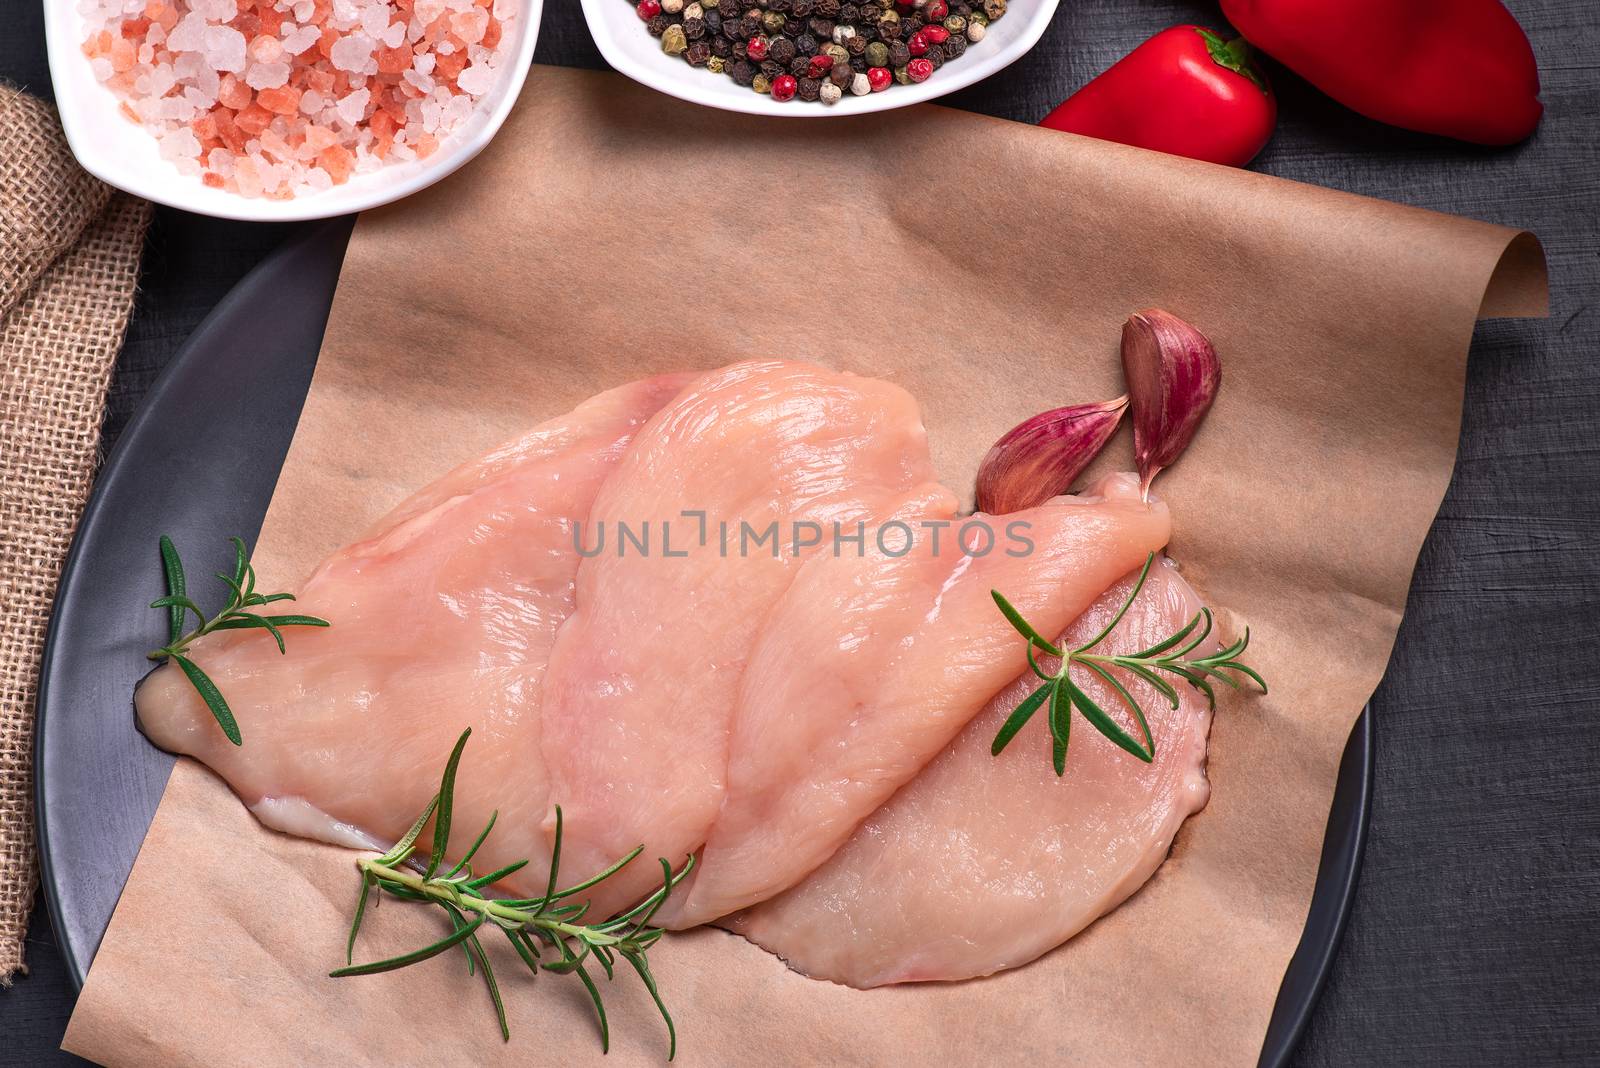 Raw chicken slices on a wooden table with raw vegetables and spices. Satilisimo. fresh, choped and sliced chicken meat. Cooking,raw sliced chicken breast.Top view. by nkooume